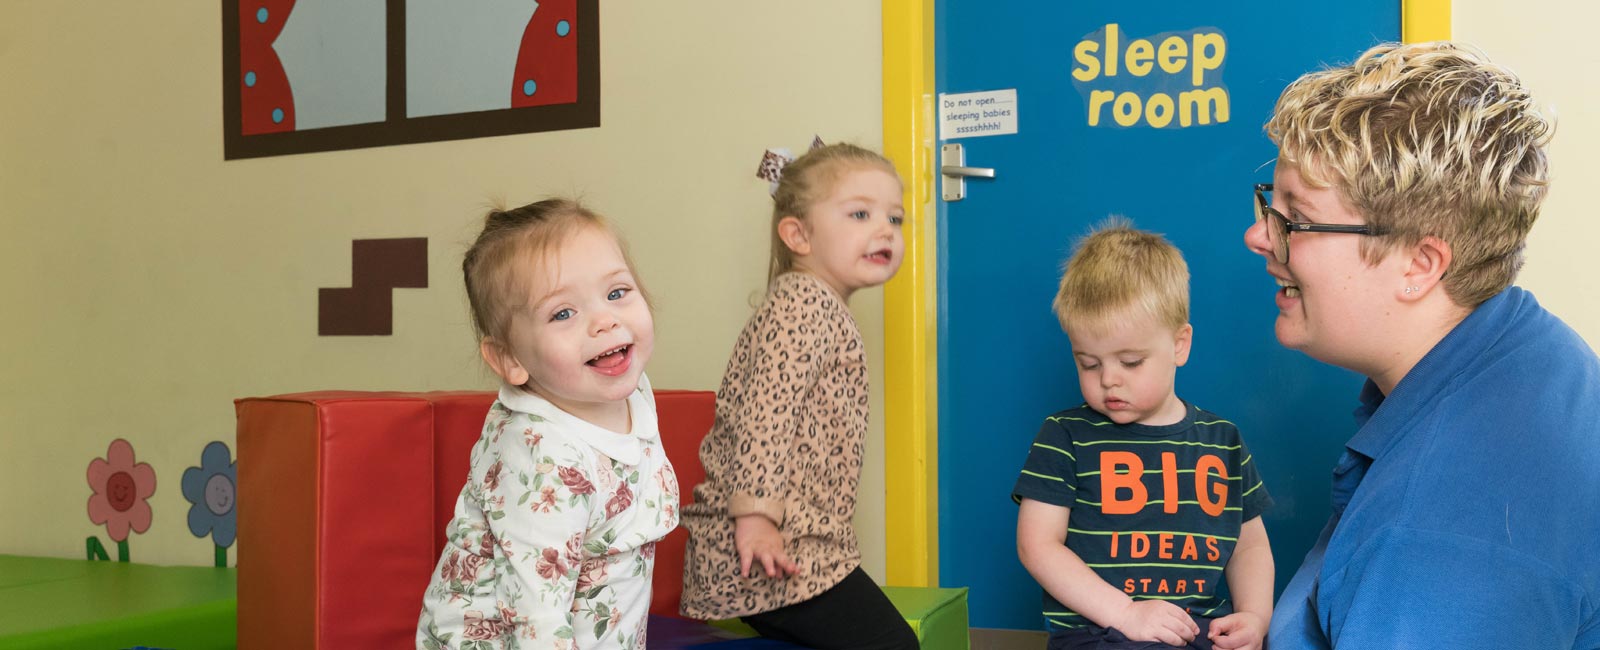 We aim to provide the best weekday childcare for babies (3m+) and children under five in Padiham and Lancashire.